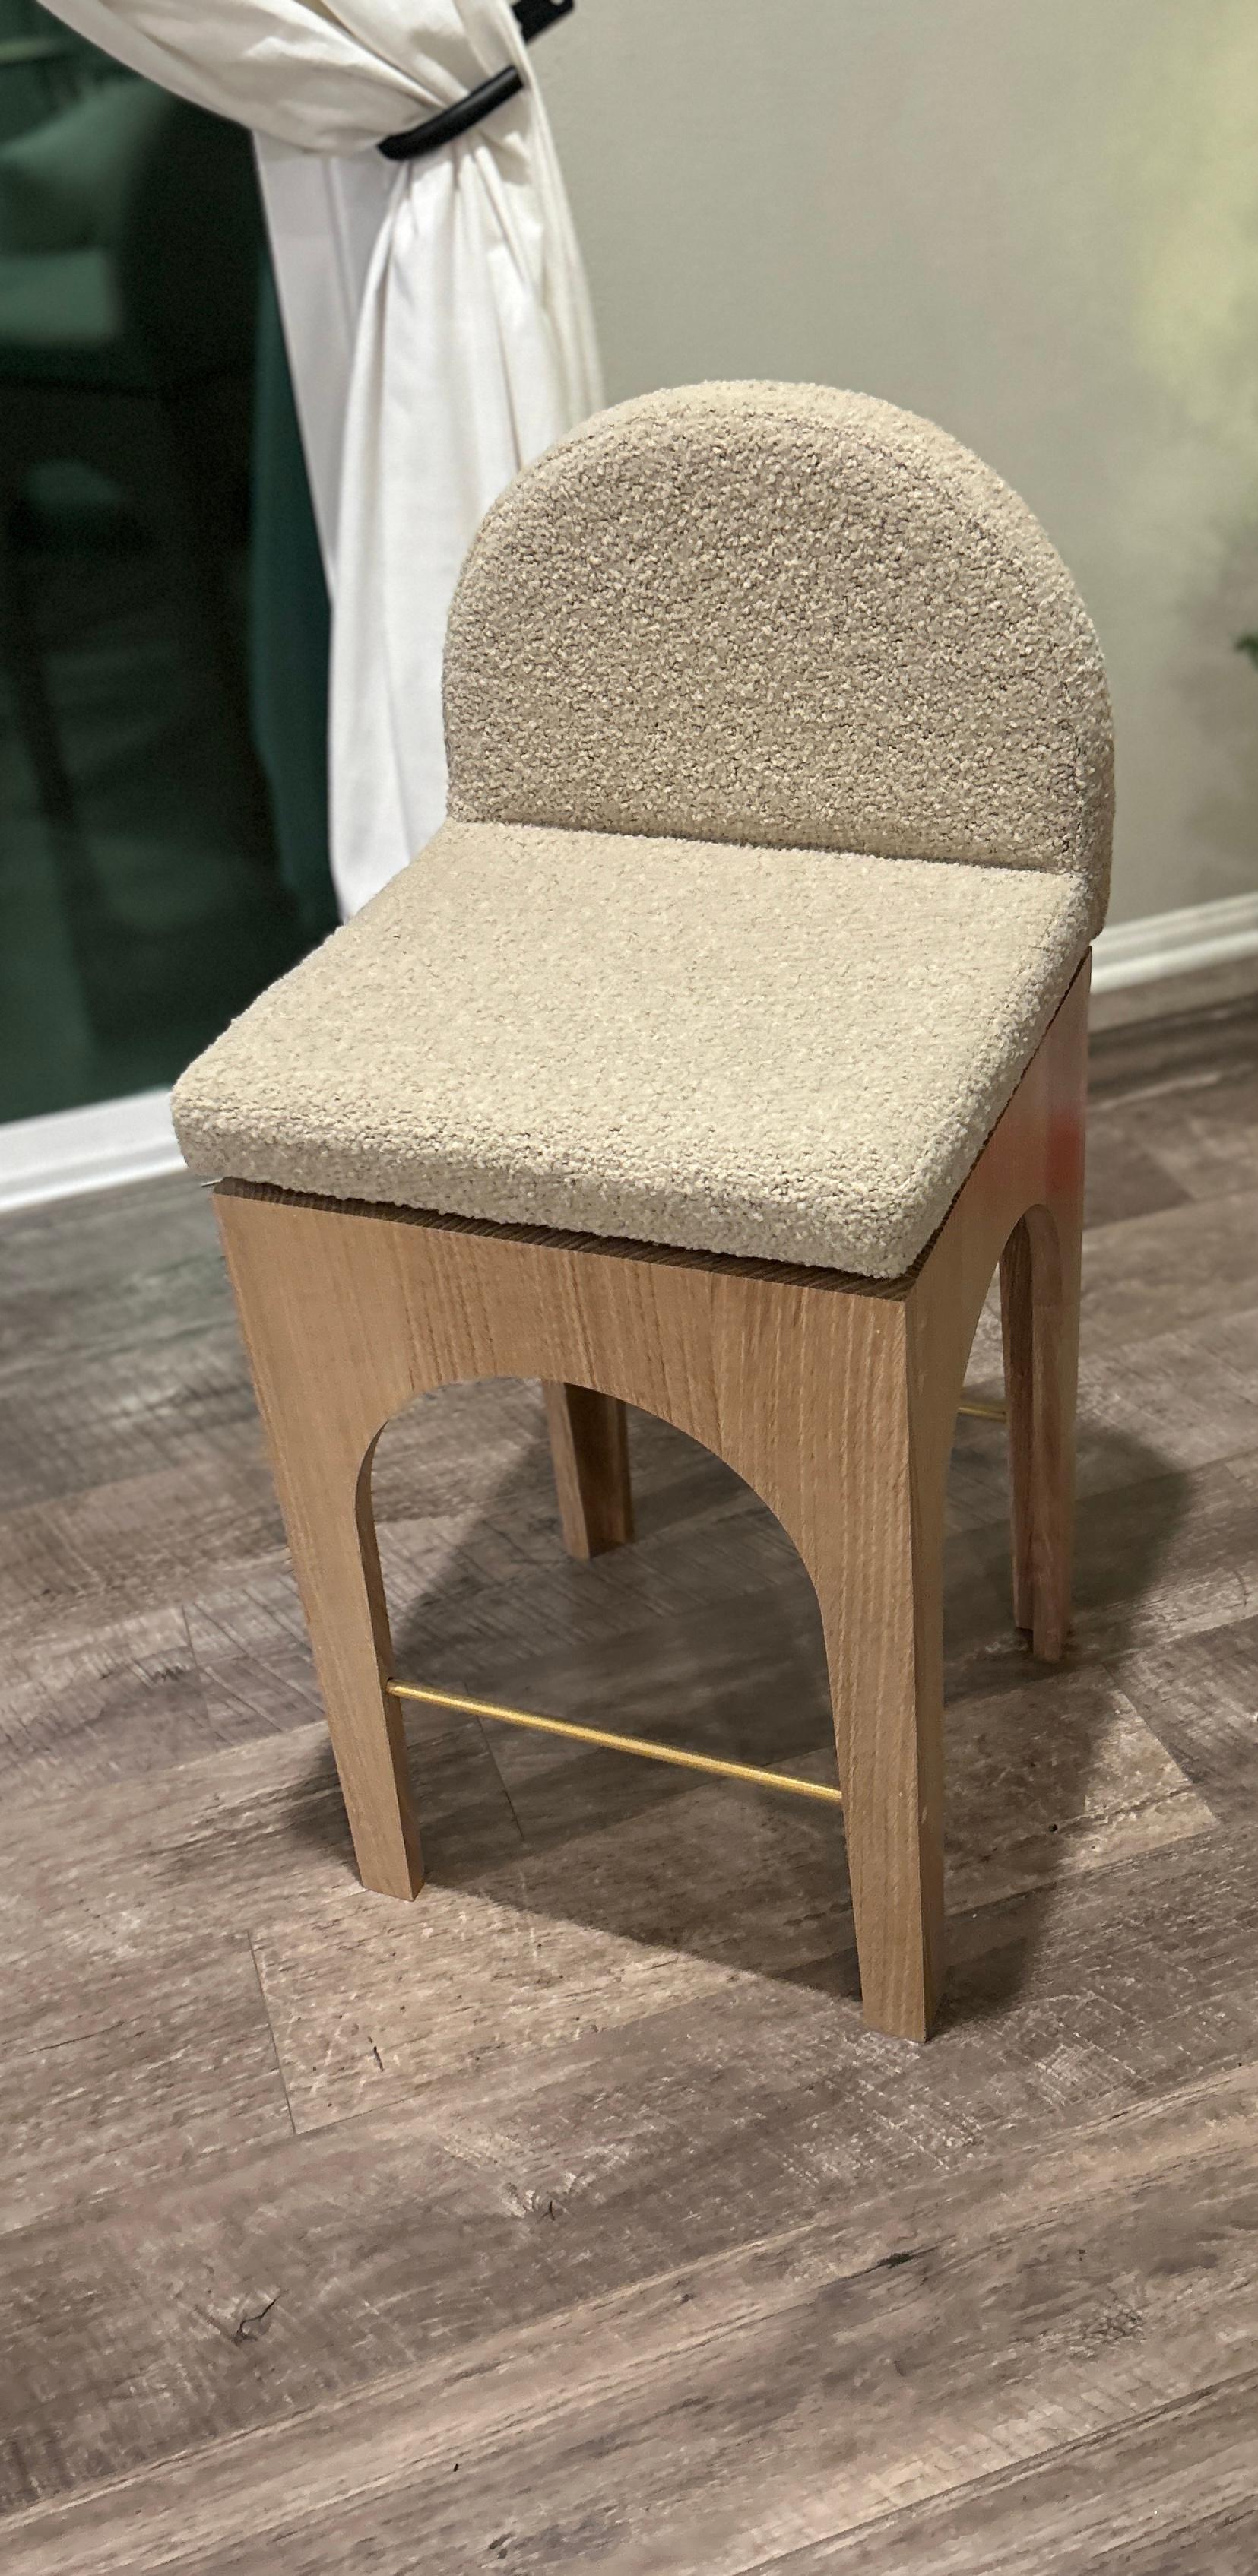 Elevate your kitchen with the 21st Century Minimalist Rift Sawn White Oak Swivel Counter Stool, meticulously crafted for both style and functionality. Designed to grace kitchen islands and counters, these stools offer unparalleled comfort and